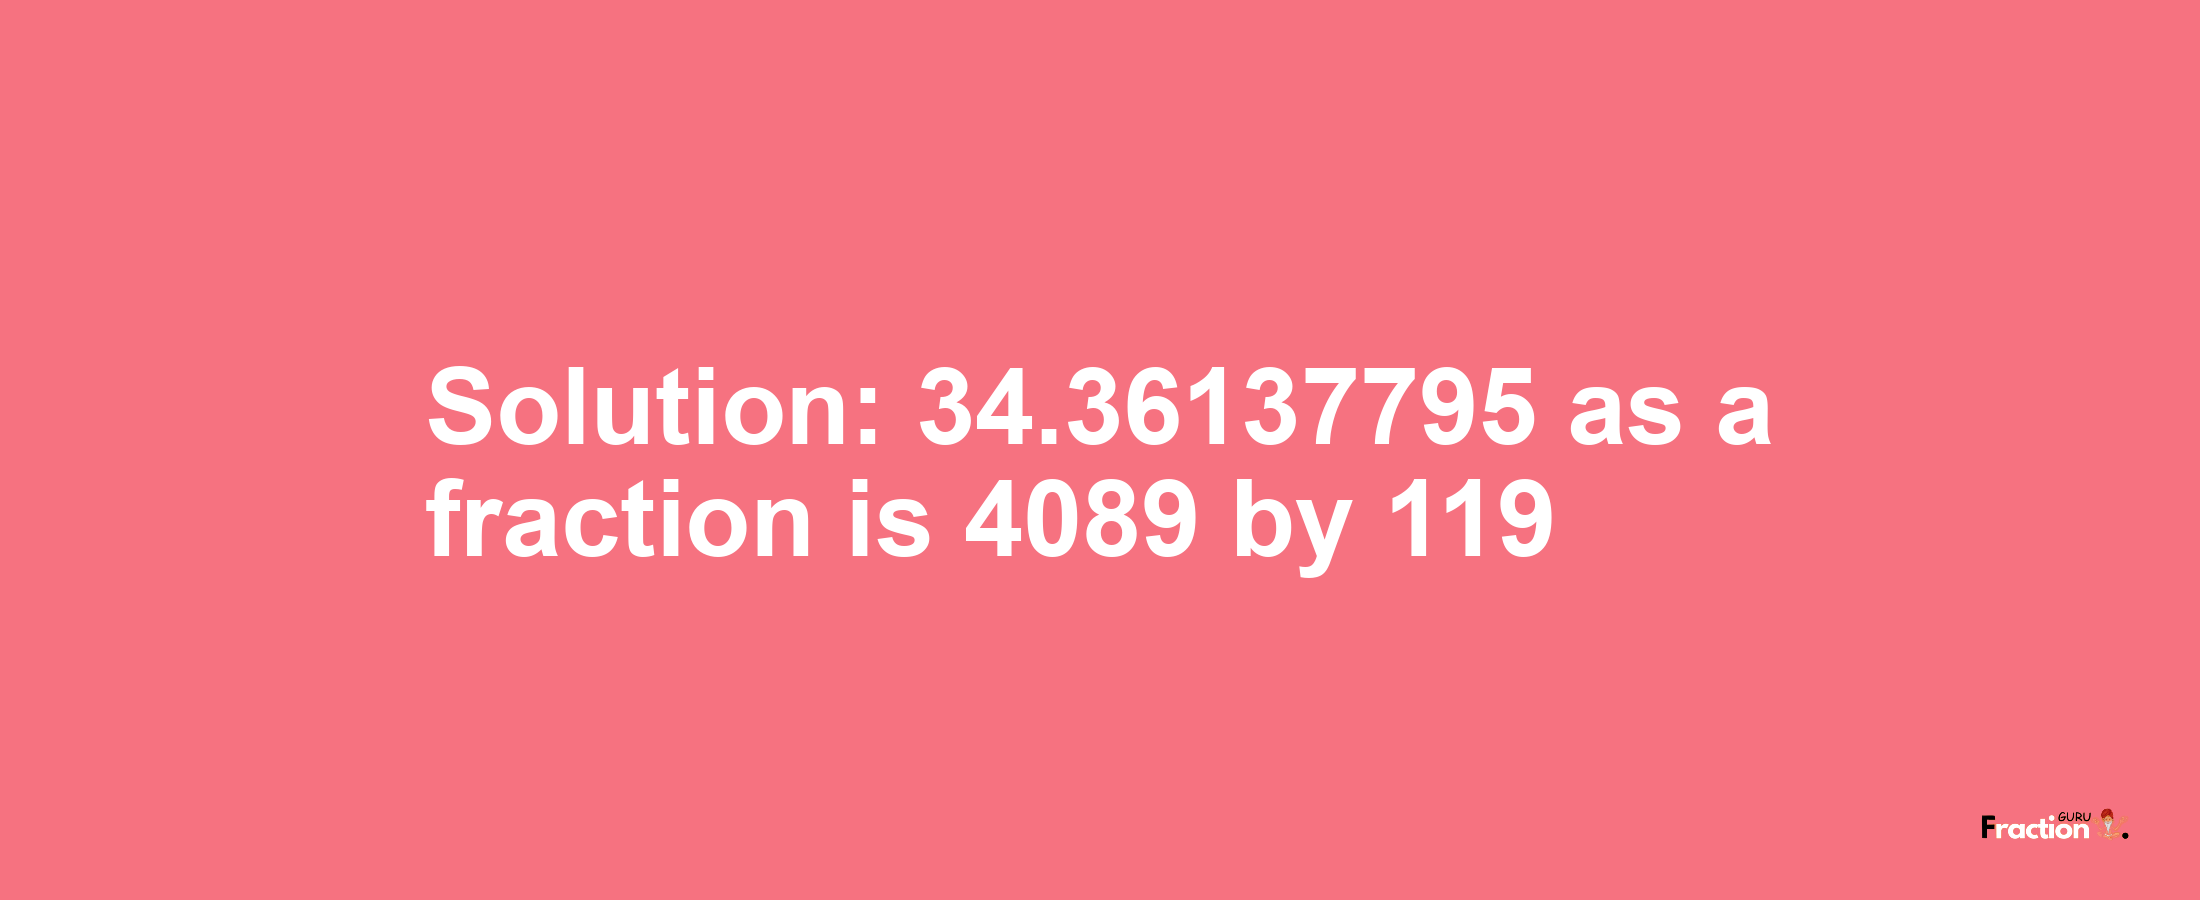 Solution:34.36137795 as a fraction is 4089/119